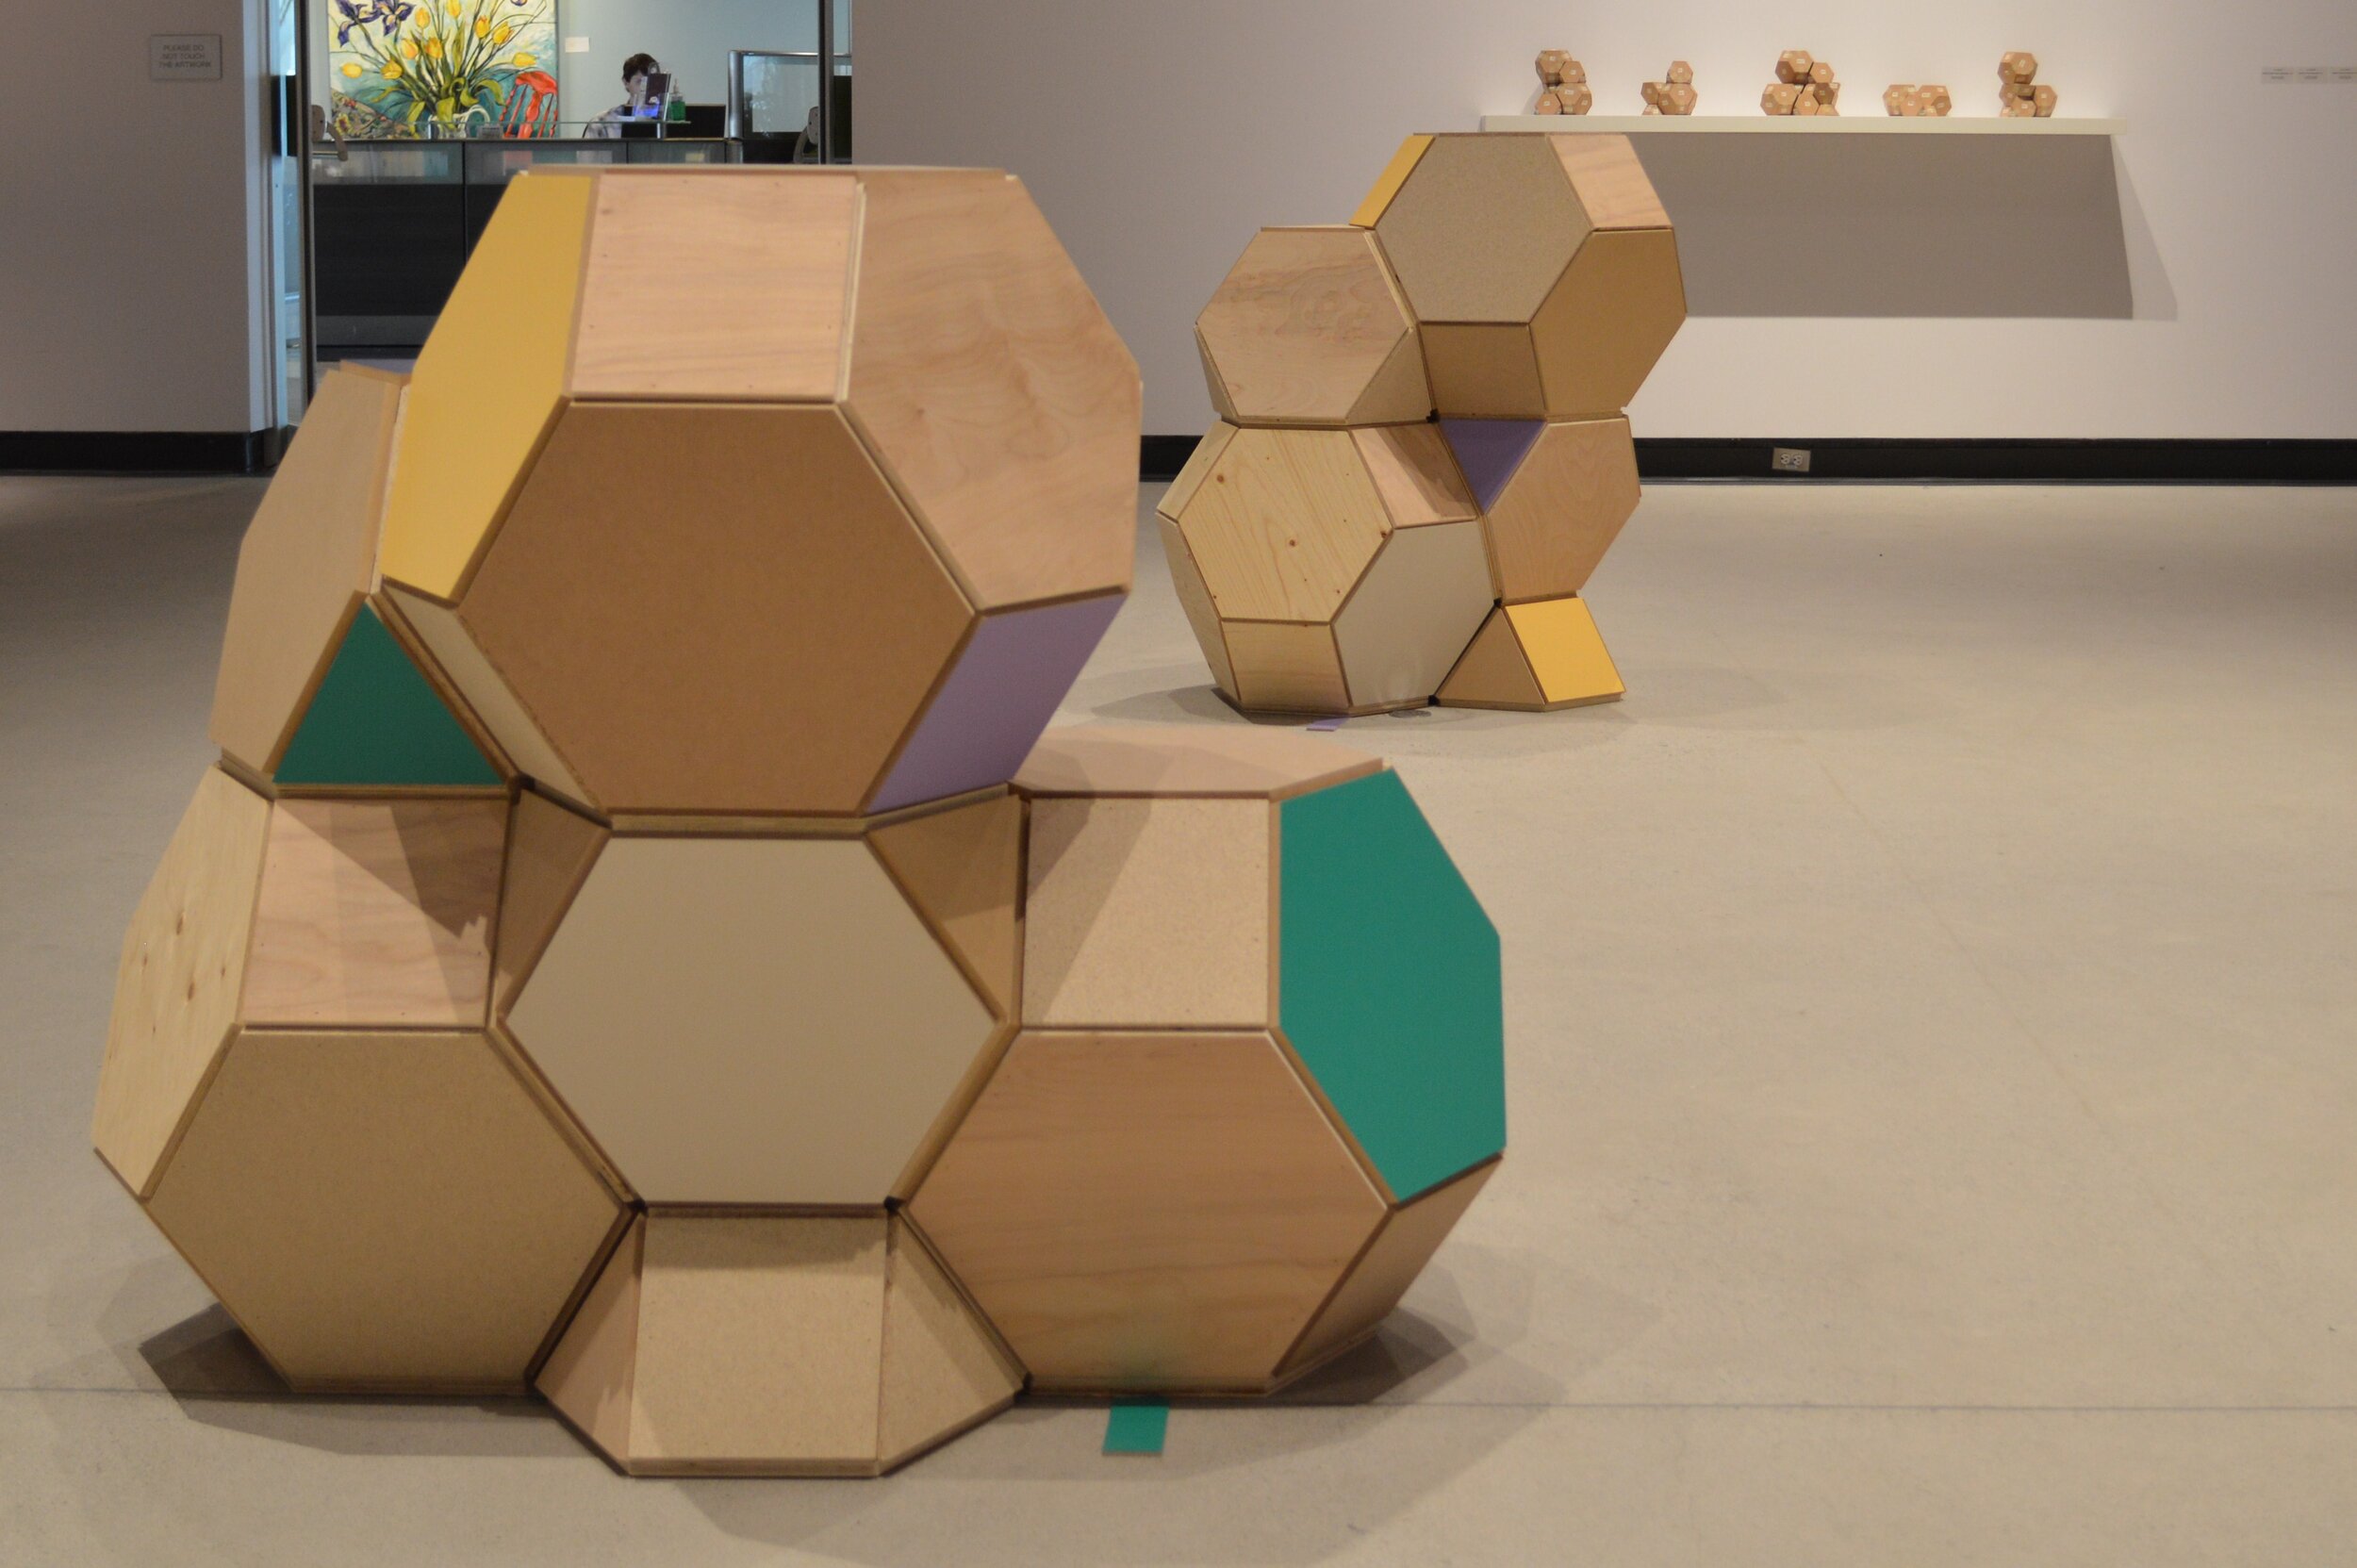 Spring 2013 Series, 2013, Spruce plywood, birch plywood, MDF, particle board, paint and shims.